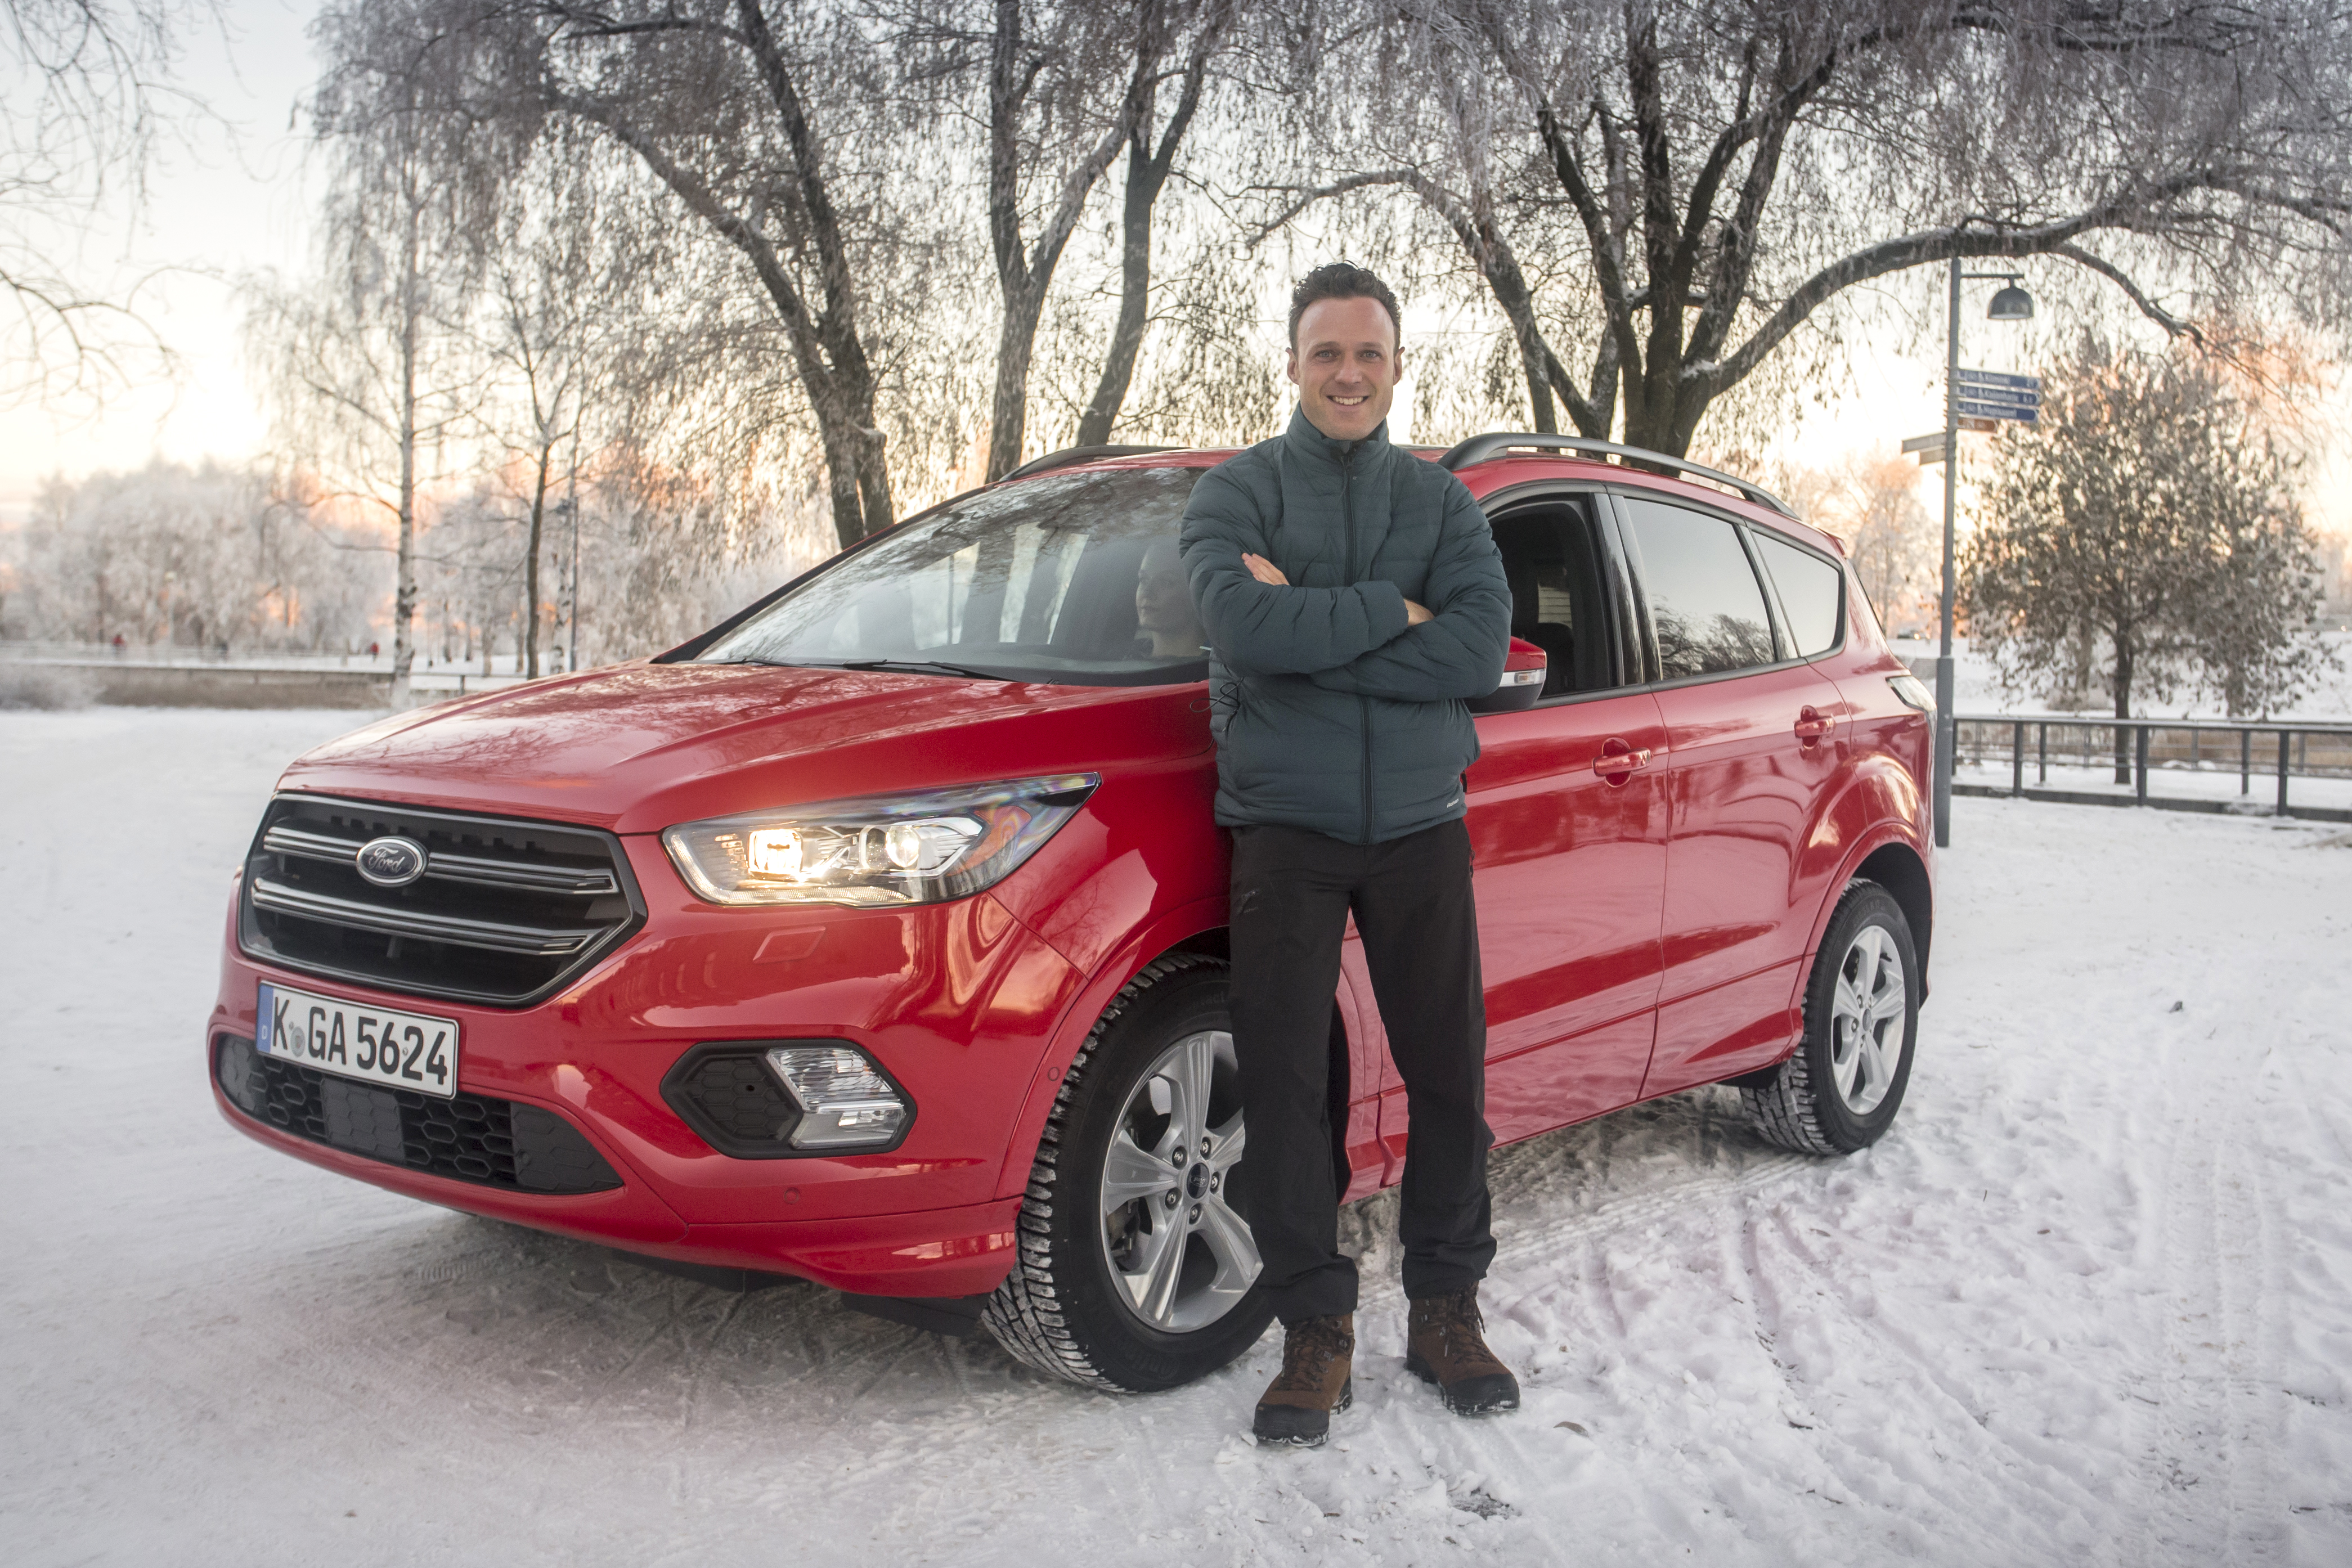 New Ford Kuga driven in Finland